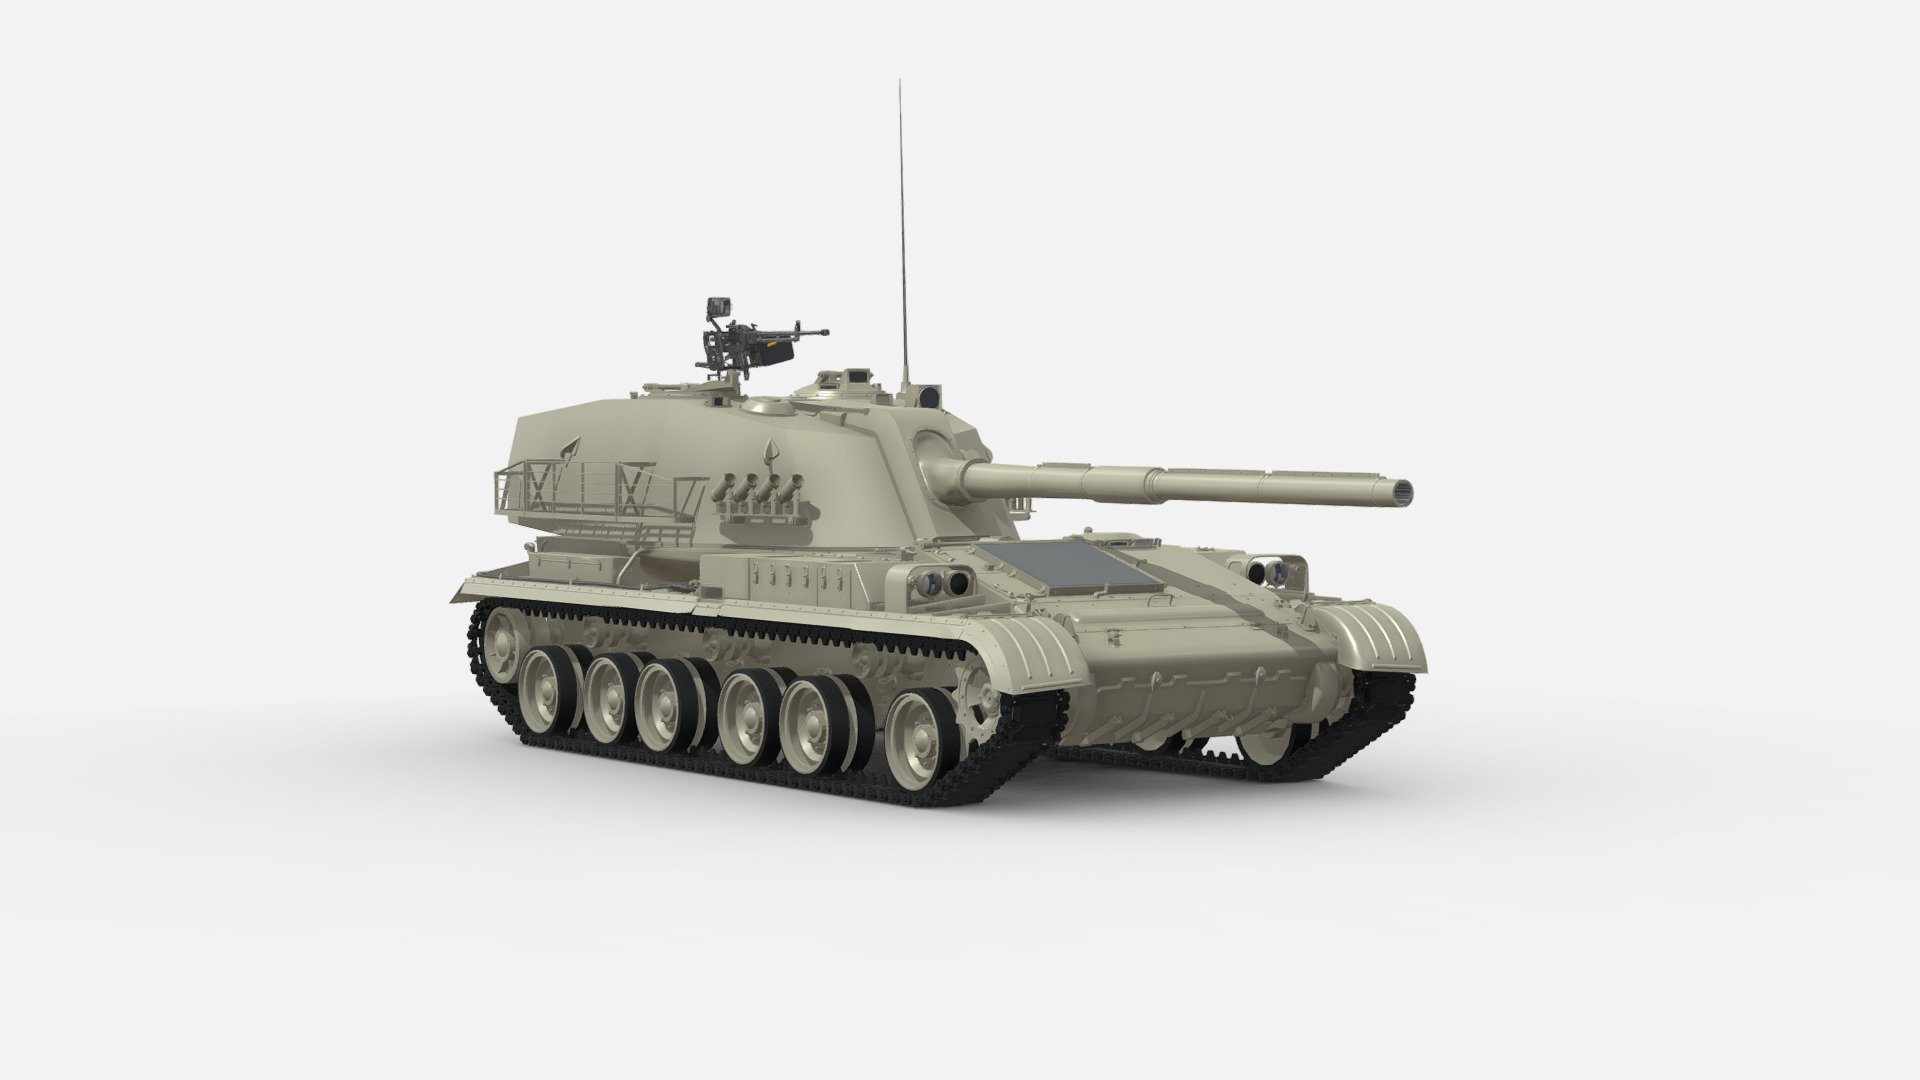 This 3D model represents the PTZ-89, a Chinese self-propelled tank destroyer based on the chassis of the Type 89 light tank. Armed with a formidable 120mm gun capable of firing guided anti-tank projectiles, the PTZ-89 boasts commendable defensive capabilities and mobility, making it a potent asset on the battlefield 3d model